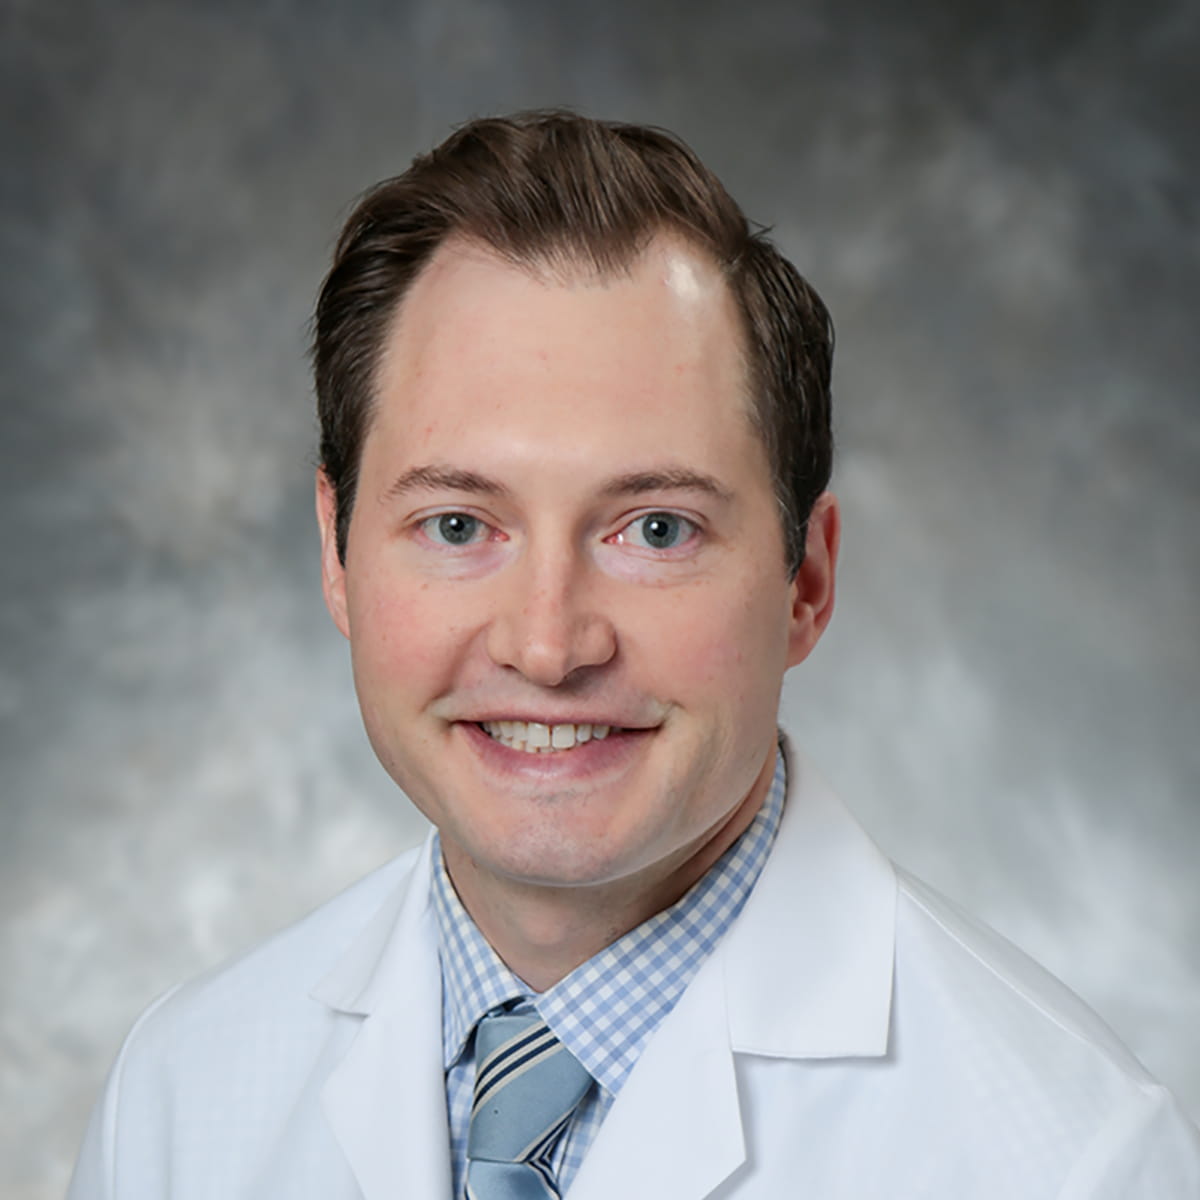 A friendly image of David Campbell, MD